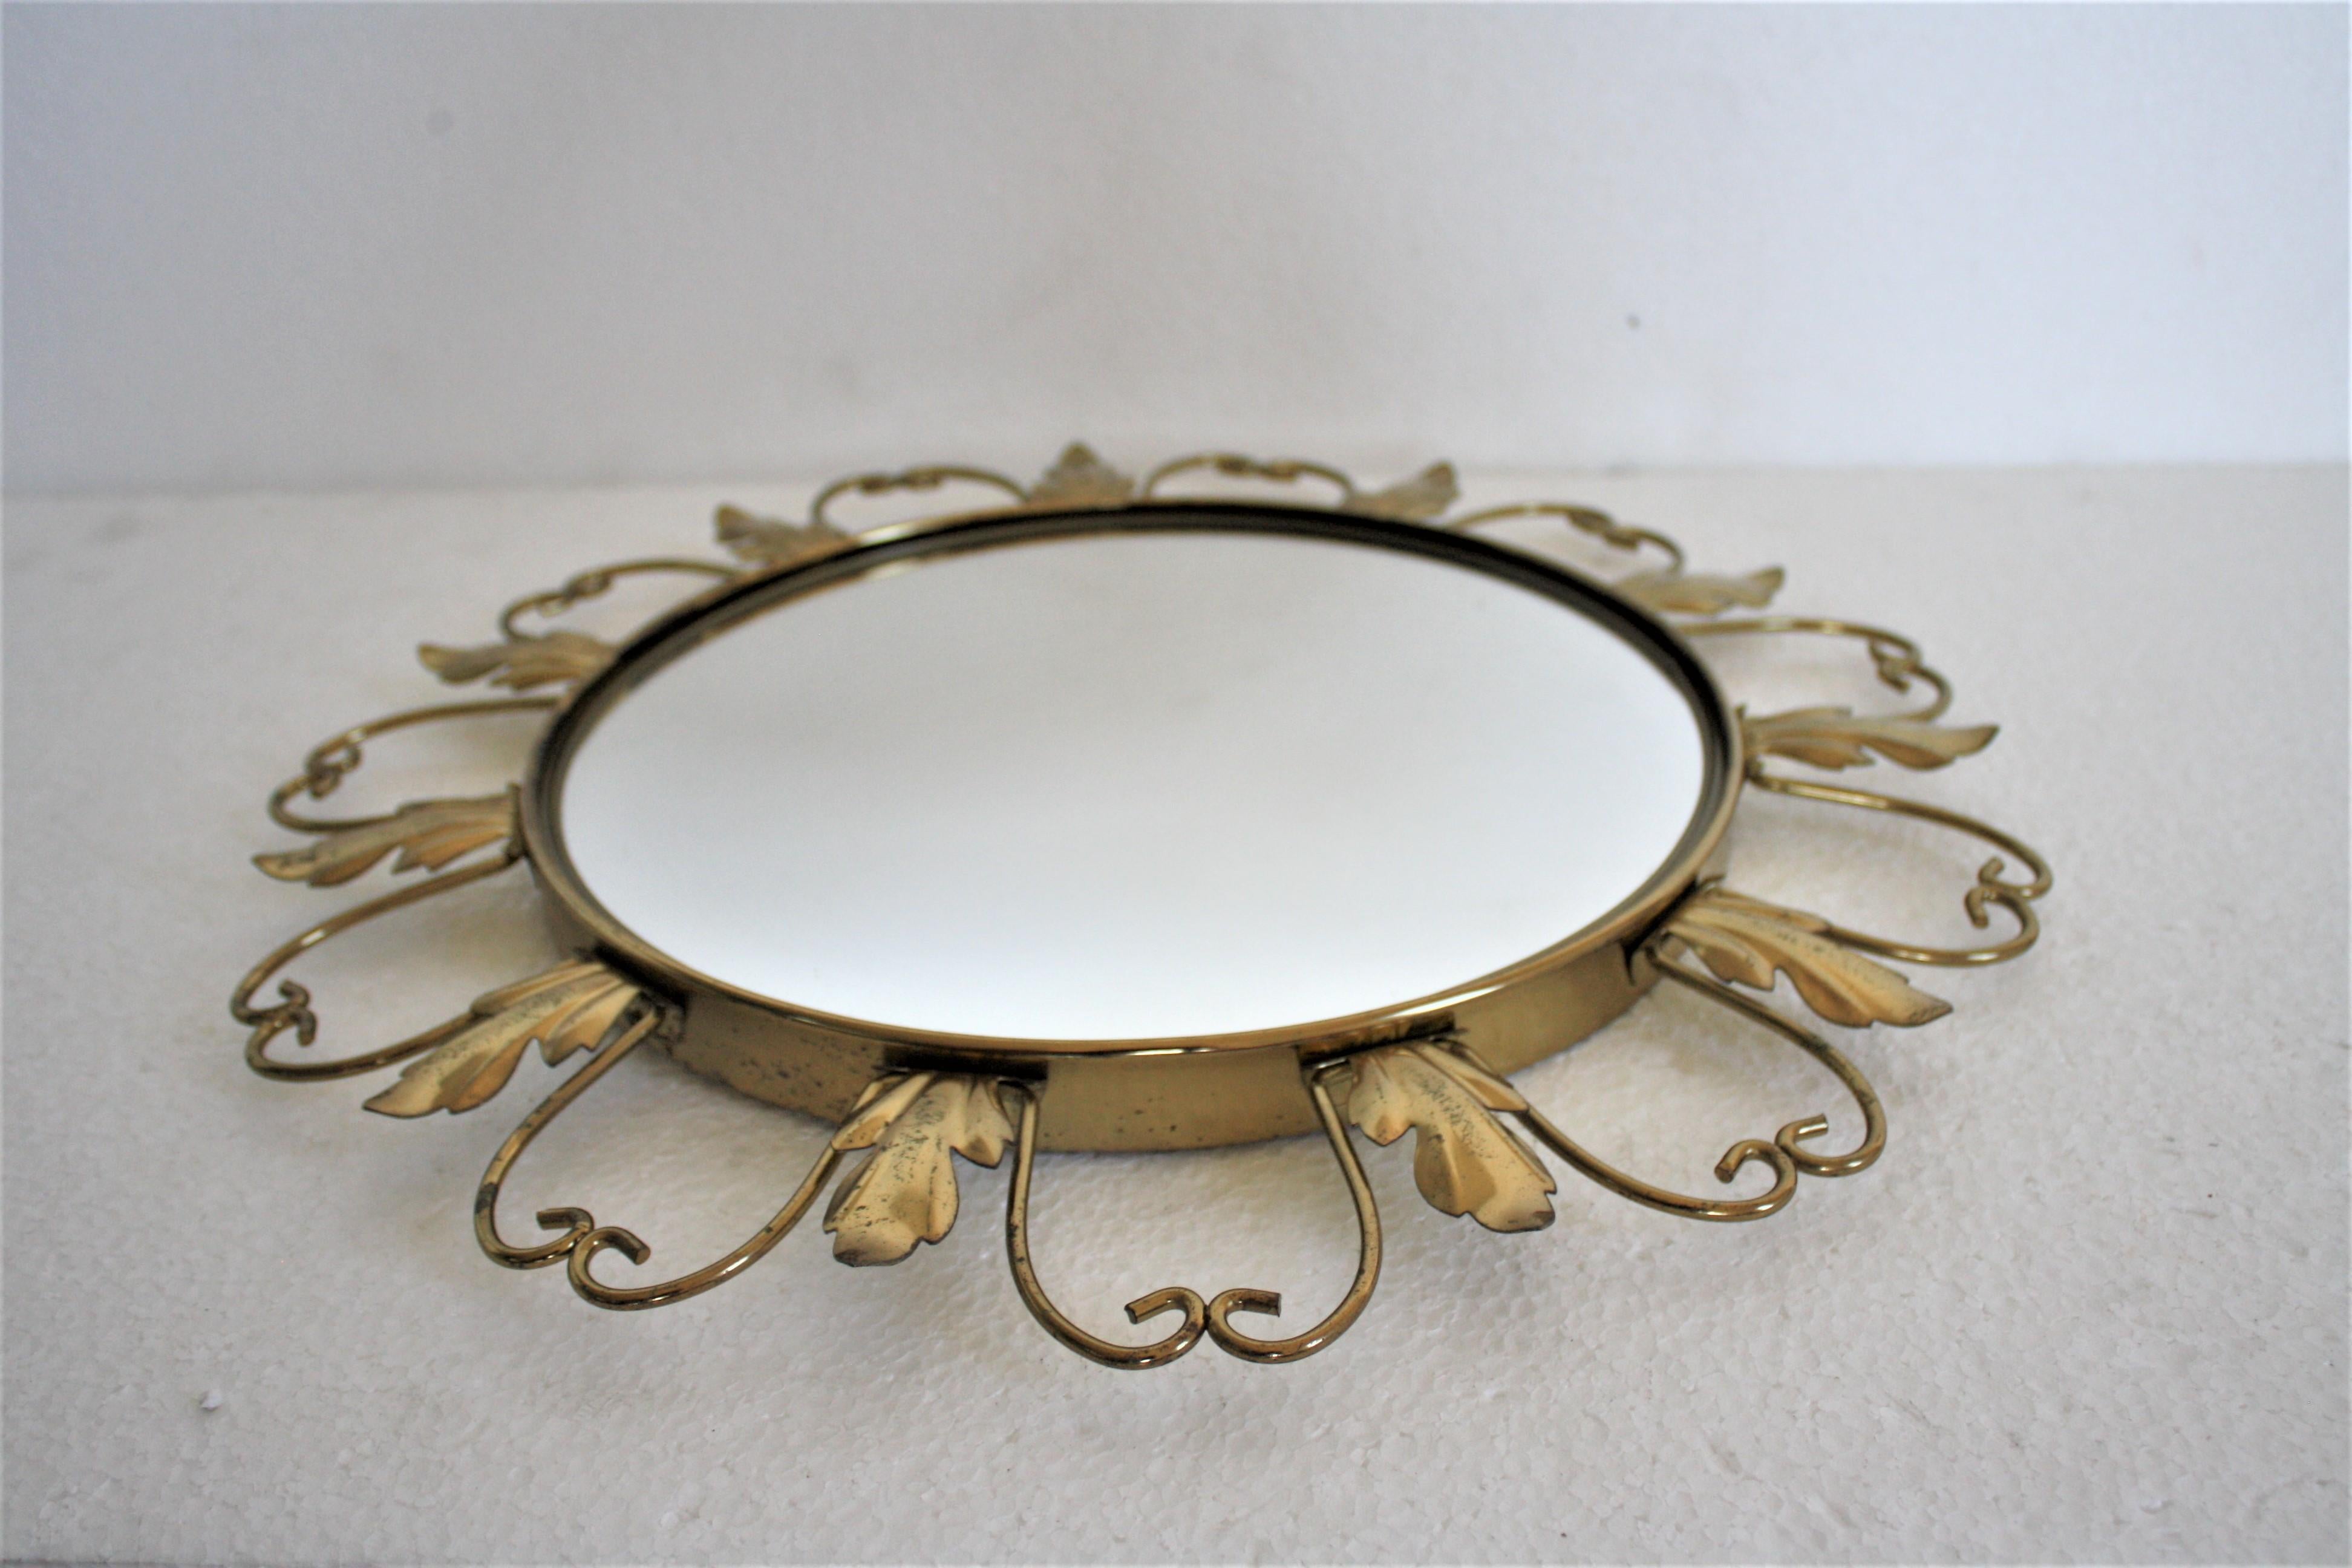 Midcentury brass sunburst or flower mirror with convex glass.

This mirror fits in most interiors and is a perfect add-on for a Regency style interior.

The mirror is made from patinated brass.

Good condition.

France - 1960s

Measures: